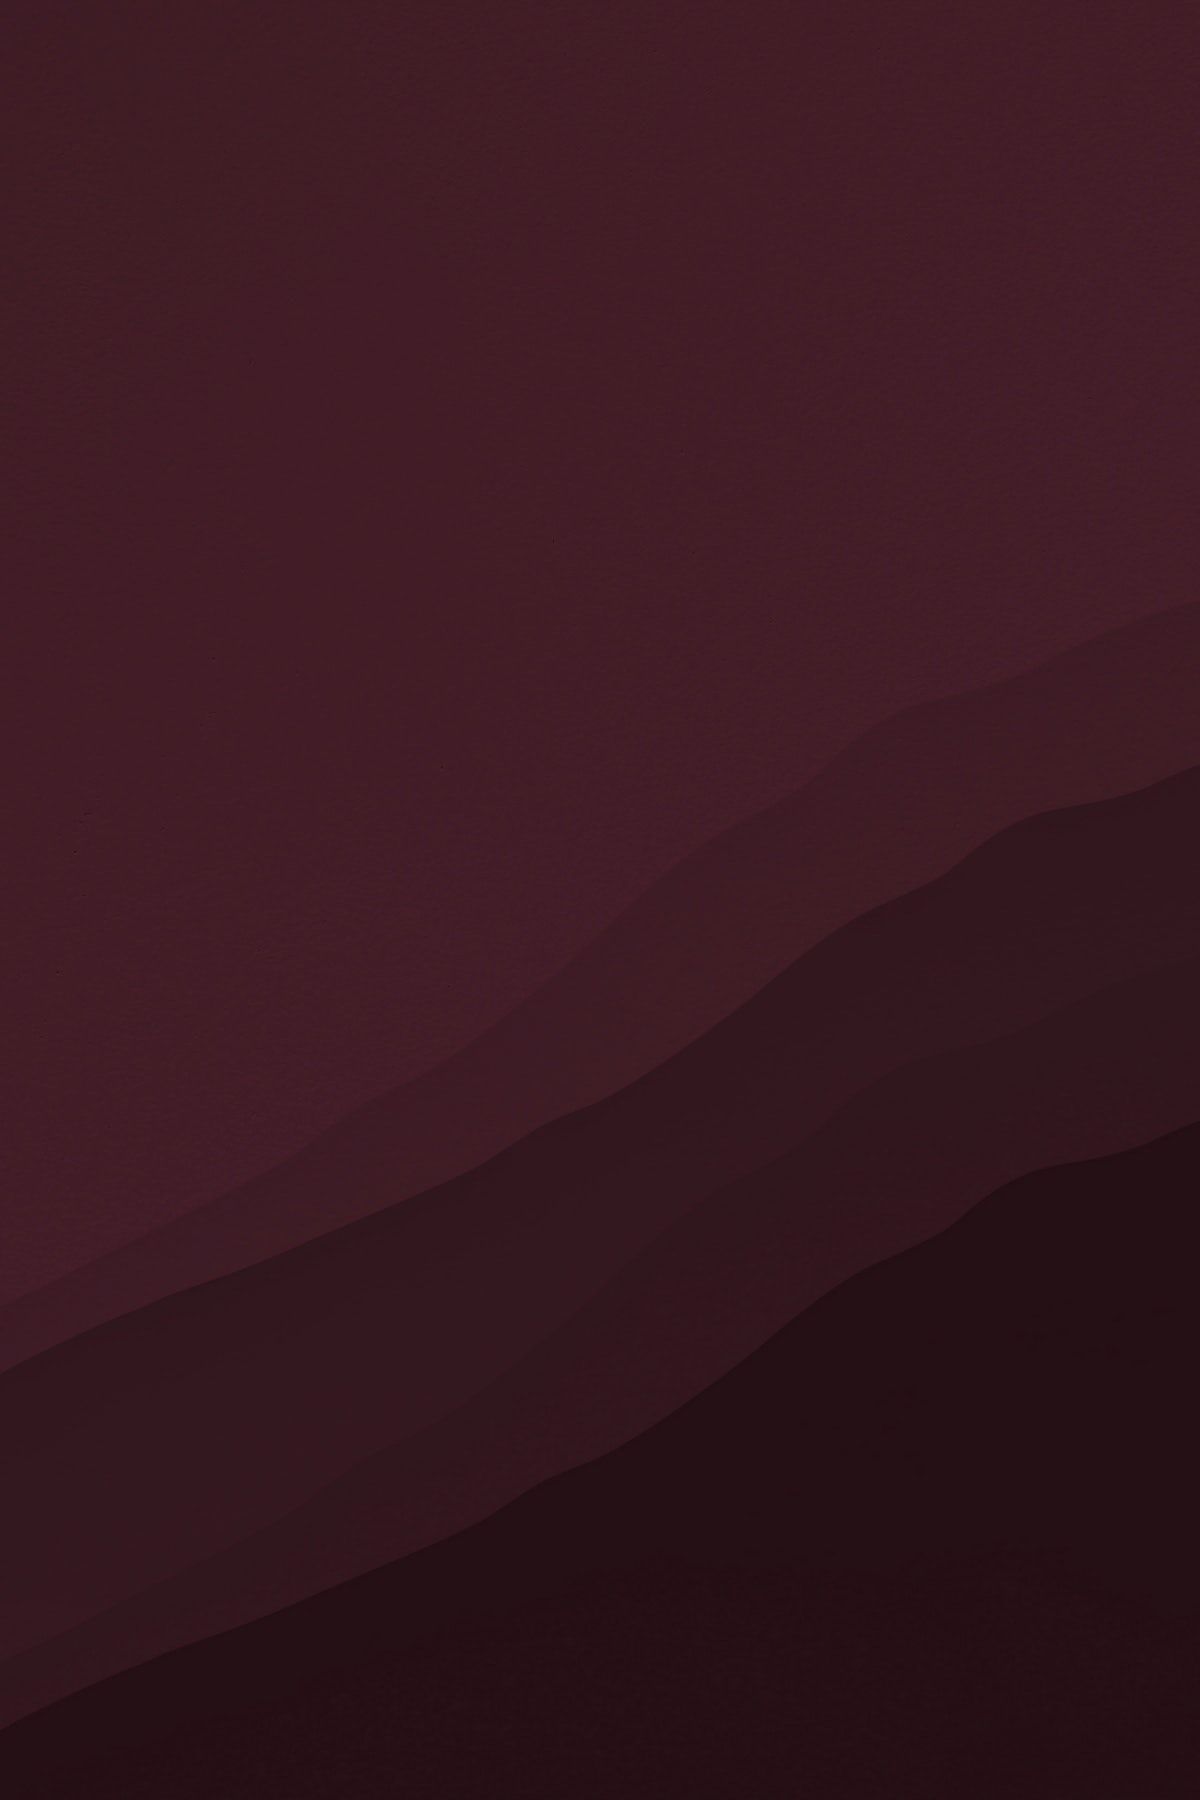 Abstract Wallpaper Maroon Background Image By